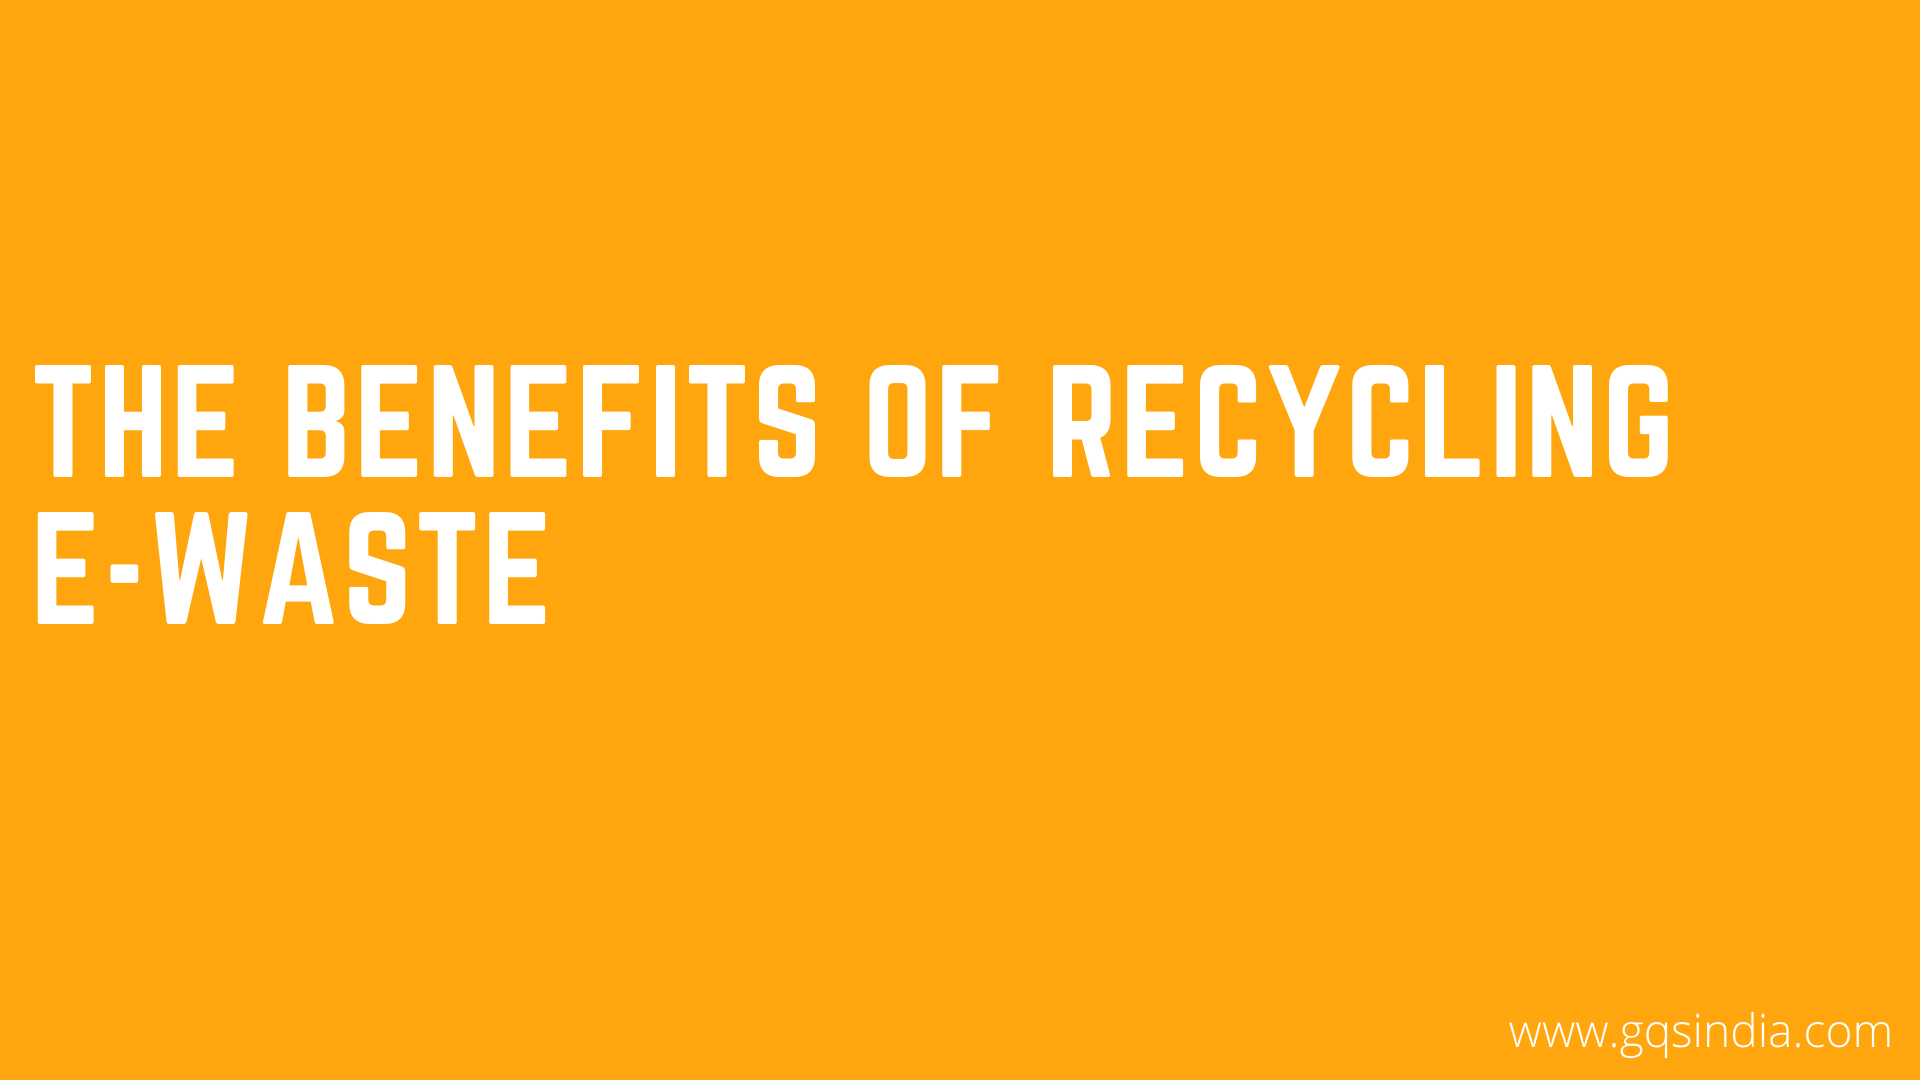 THE BENEFITS OF RECYCLING E-WASTE